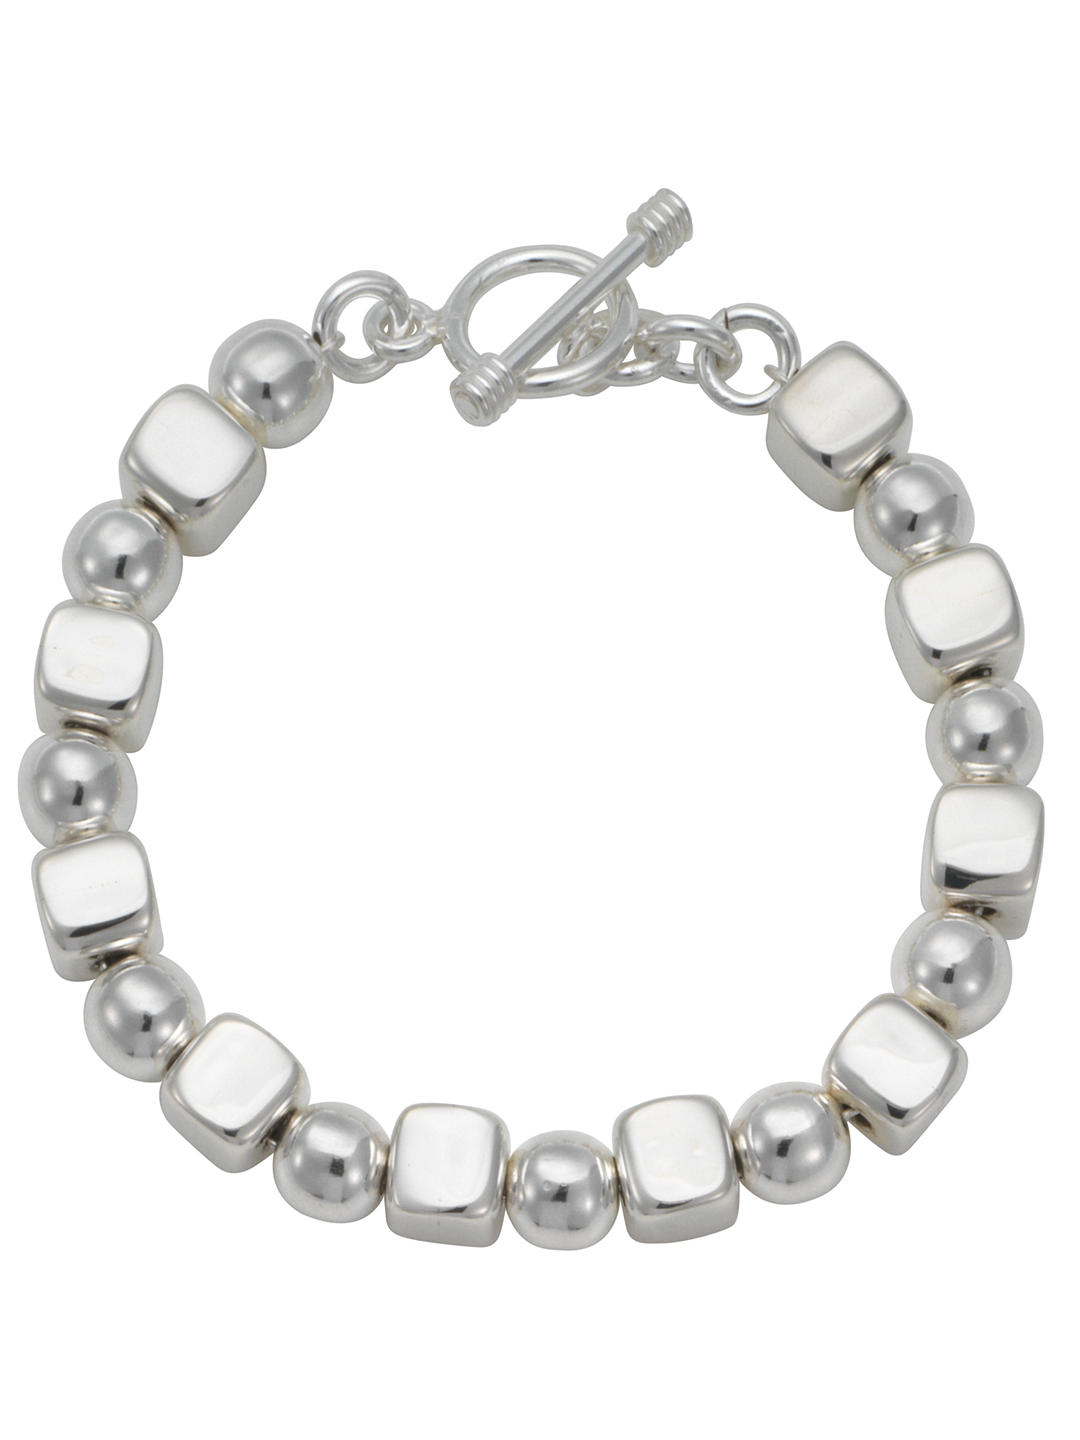 Andea Silver Cube and Ball Bracelet